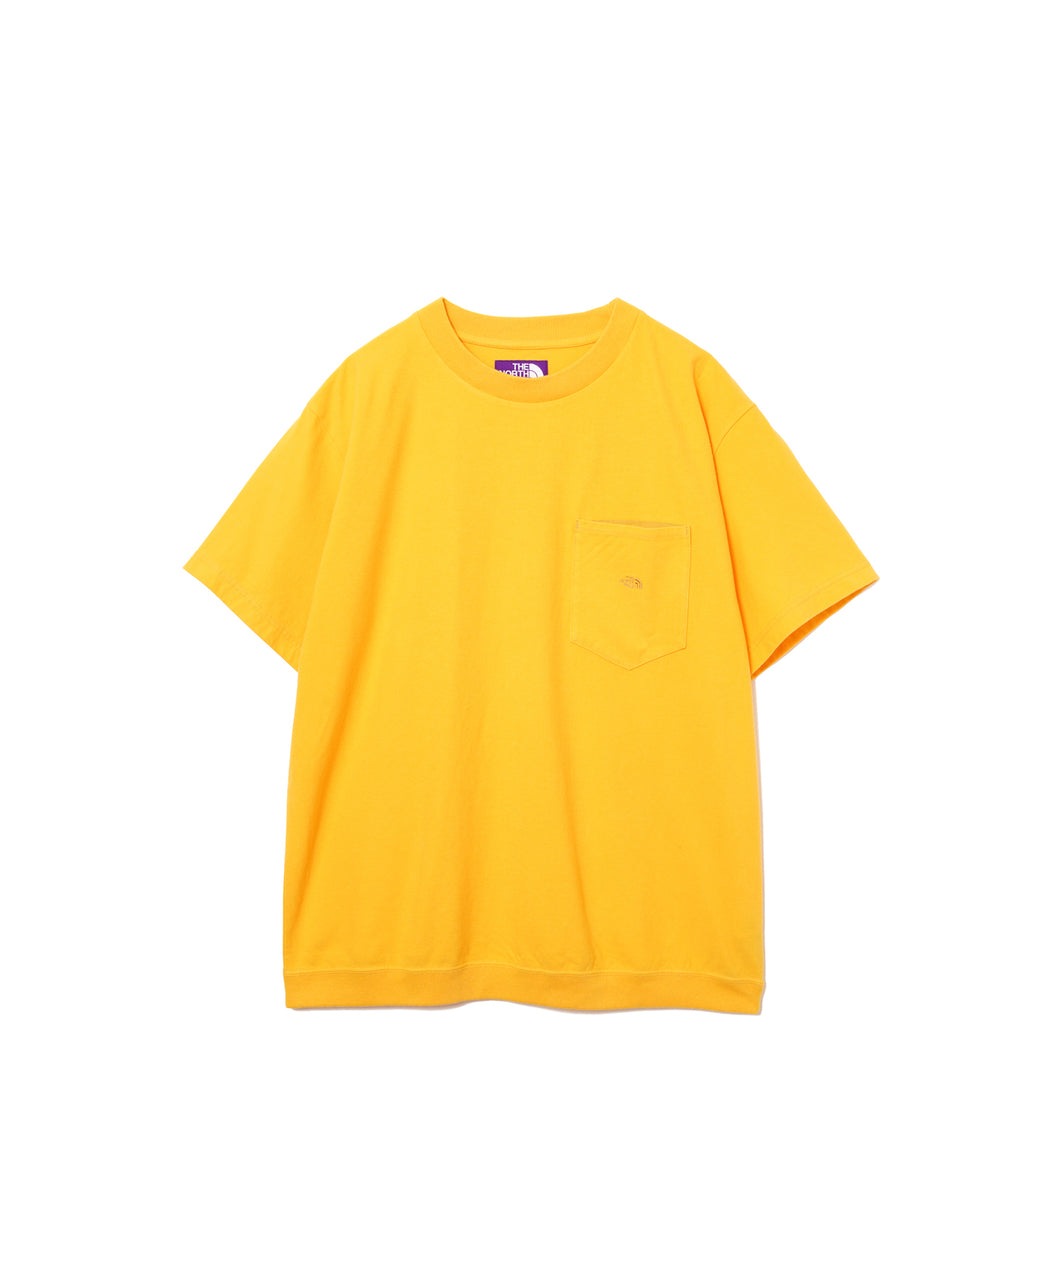 【MEN , WOMEN】THE NORTH FACE PURPLE LABEL High Bulky H/S Pocket Tee